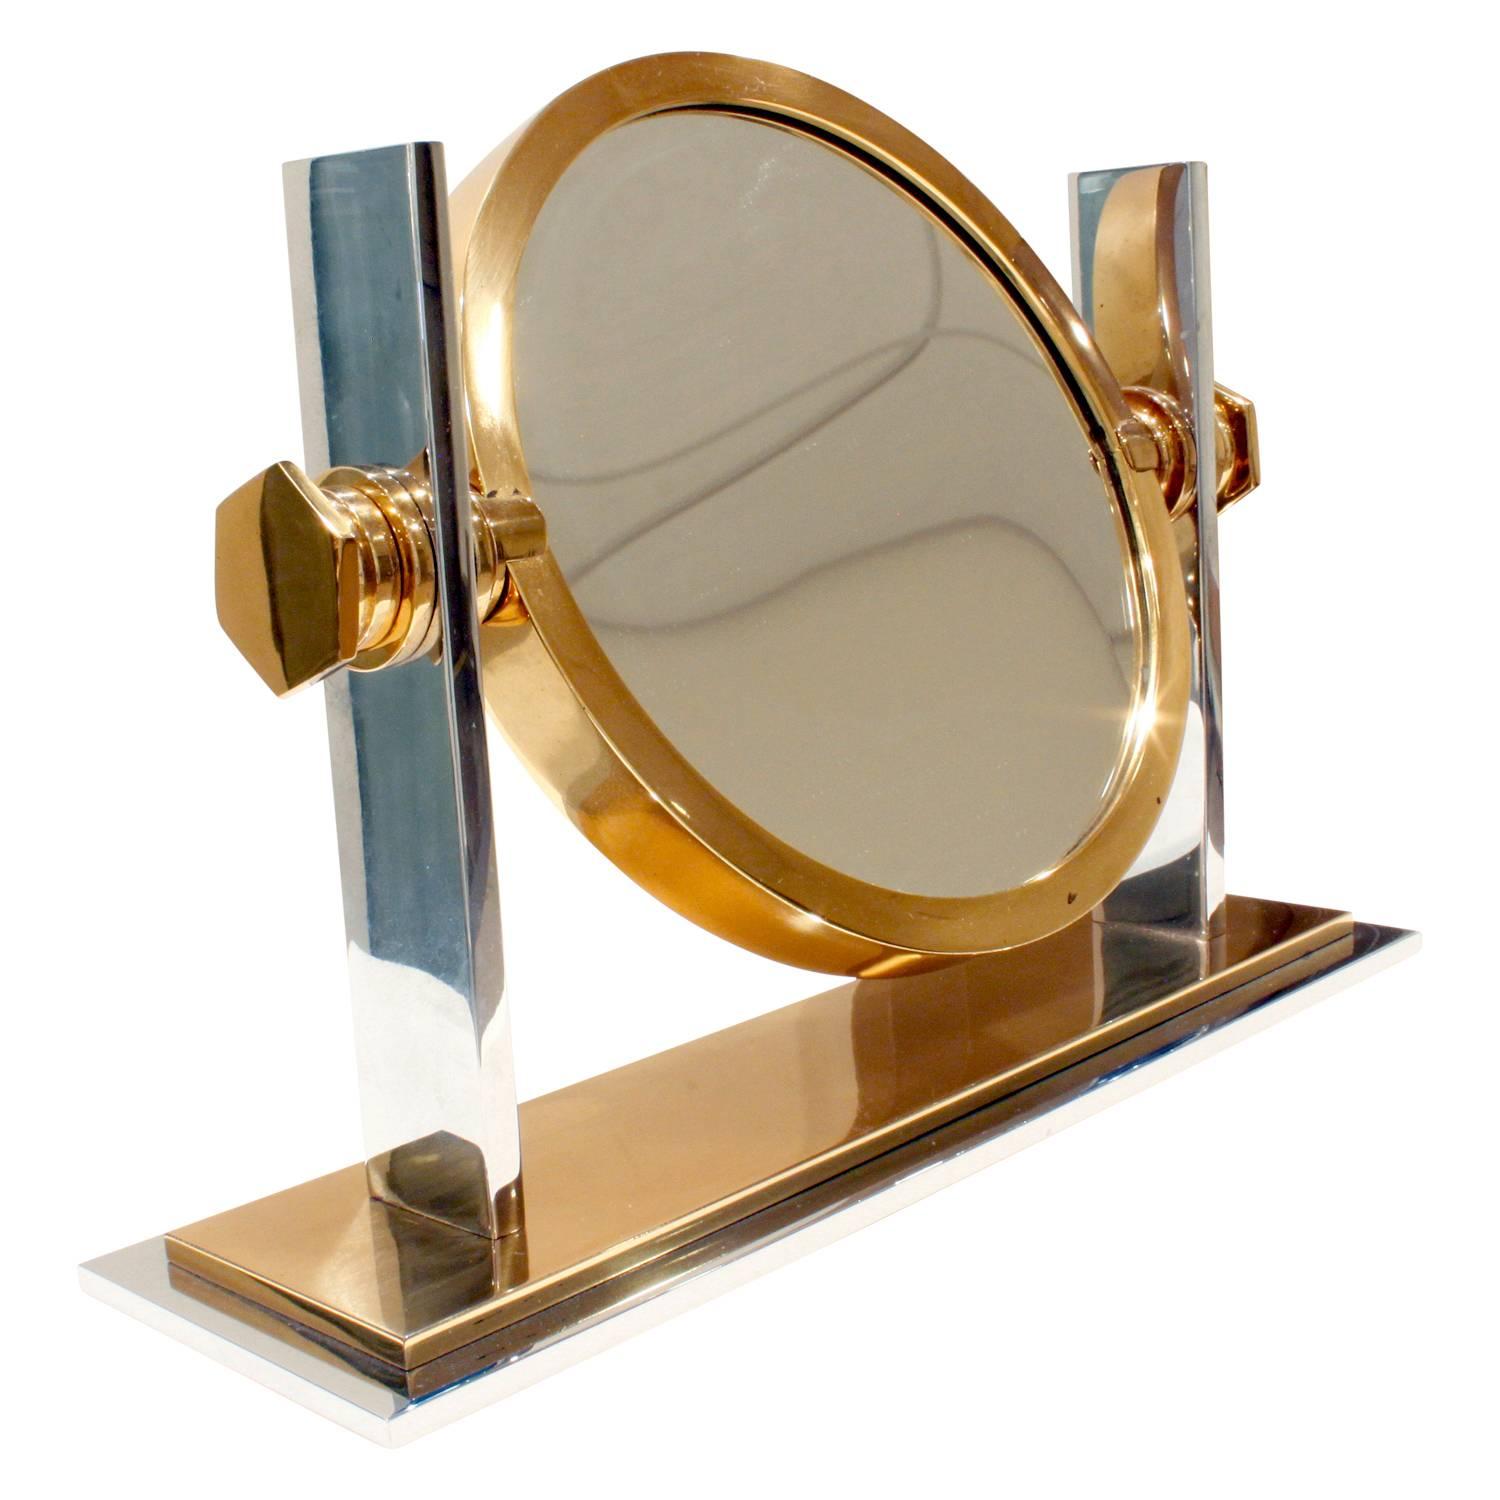 Meticulously crafted vanity mirror in polished chrome and brass with magnifier on one side and mirror on the other by Karl Springer, American, 1980s.